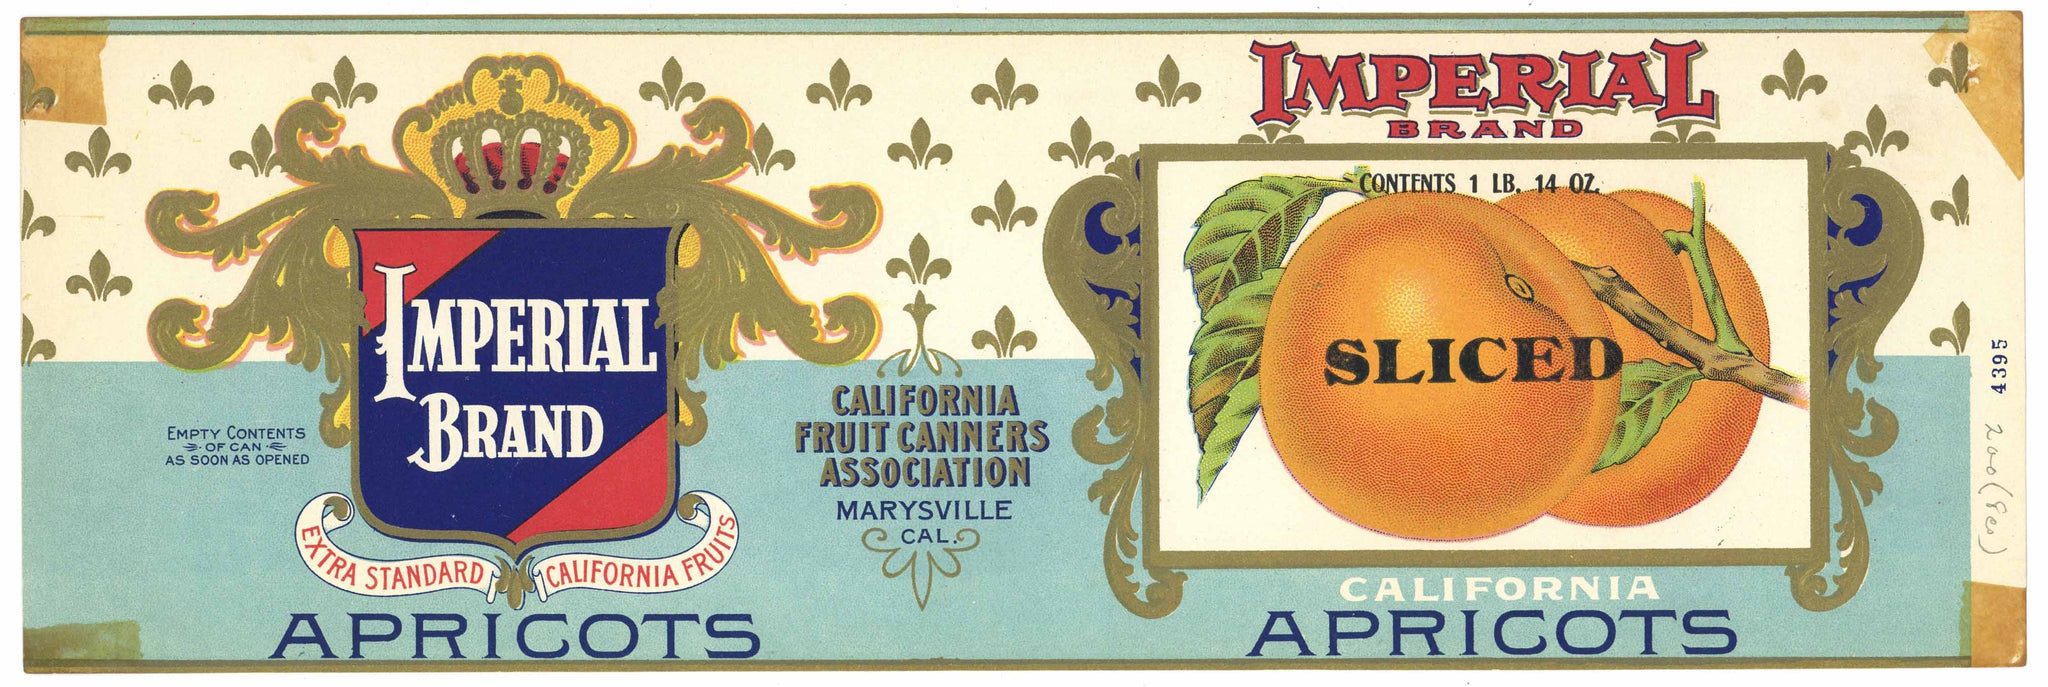 Imperial Brand Vintage Marysville Apricot Can Label